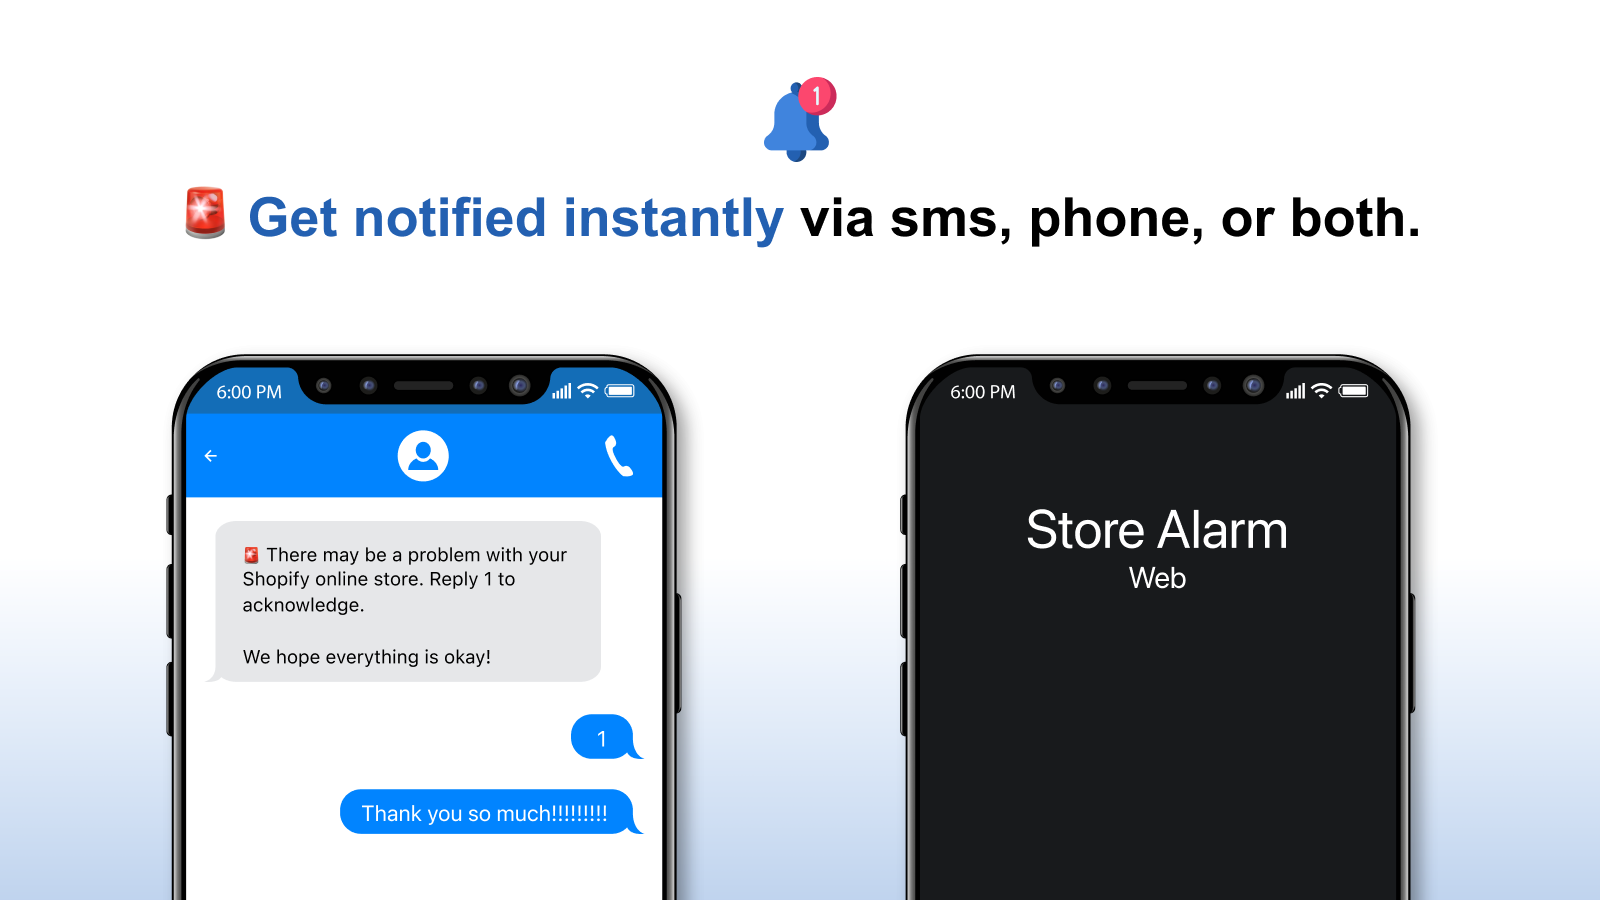 Get notified instantly via sms, phone, or both.